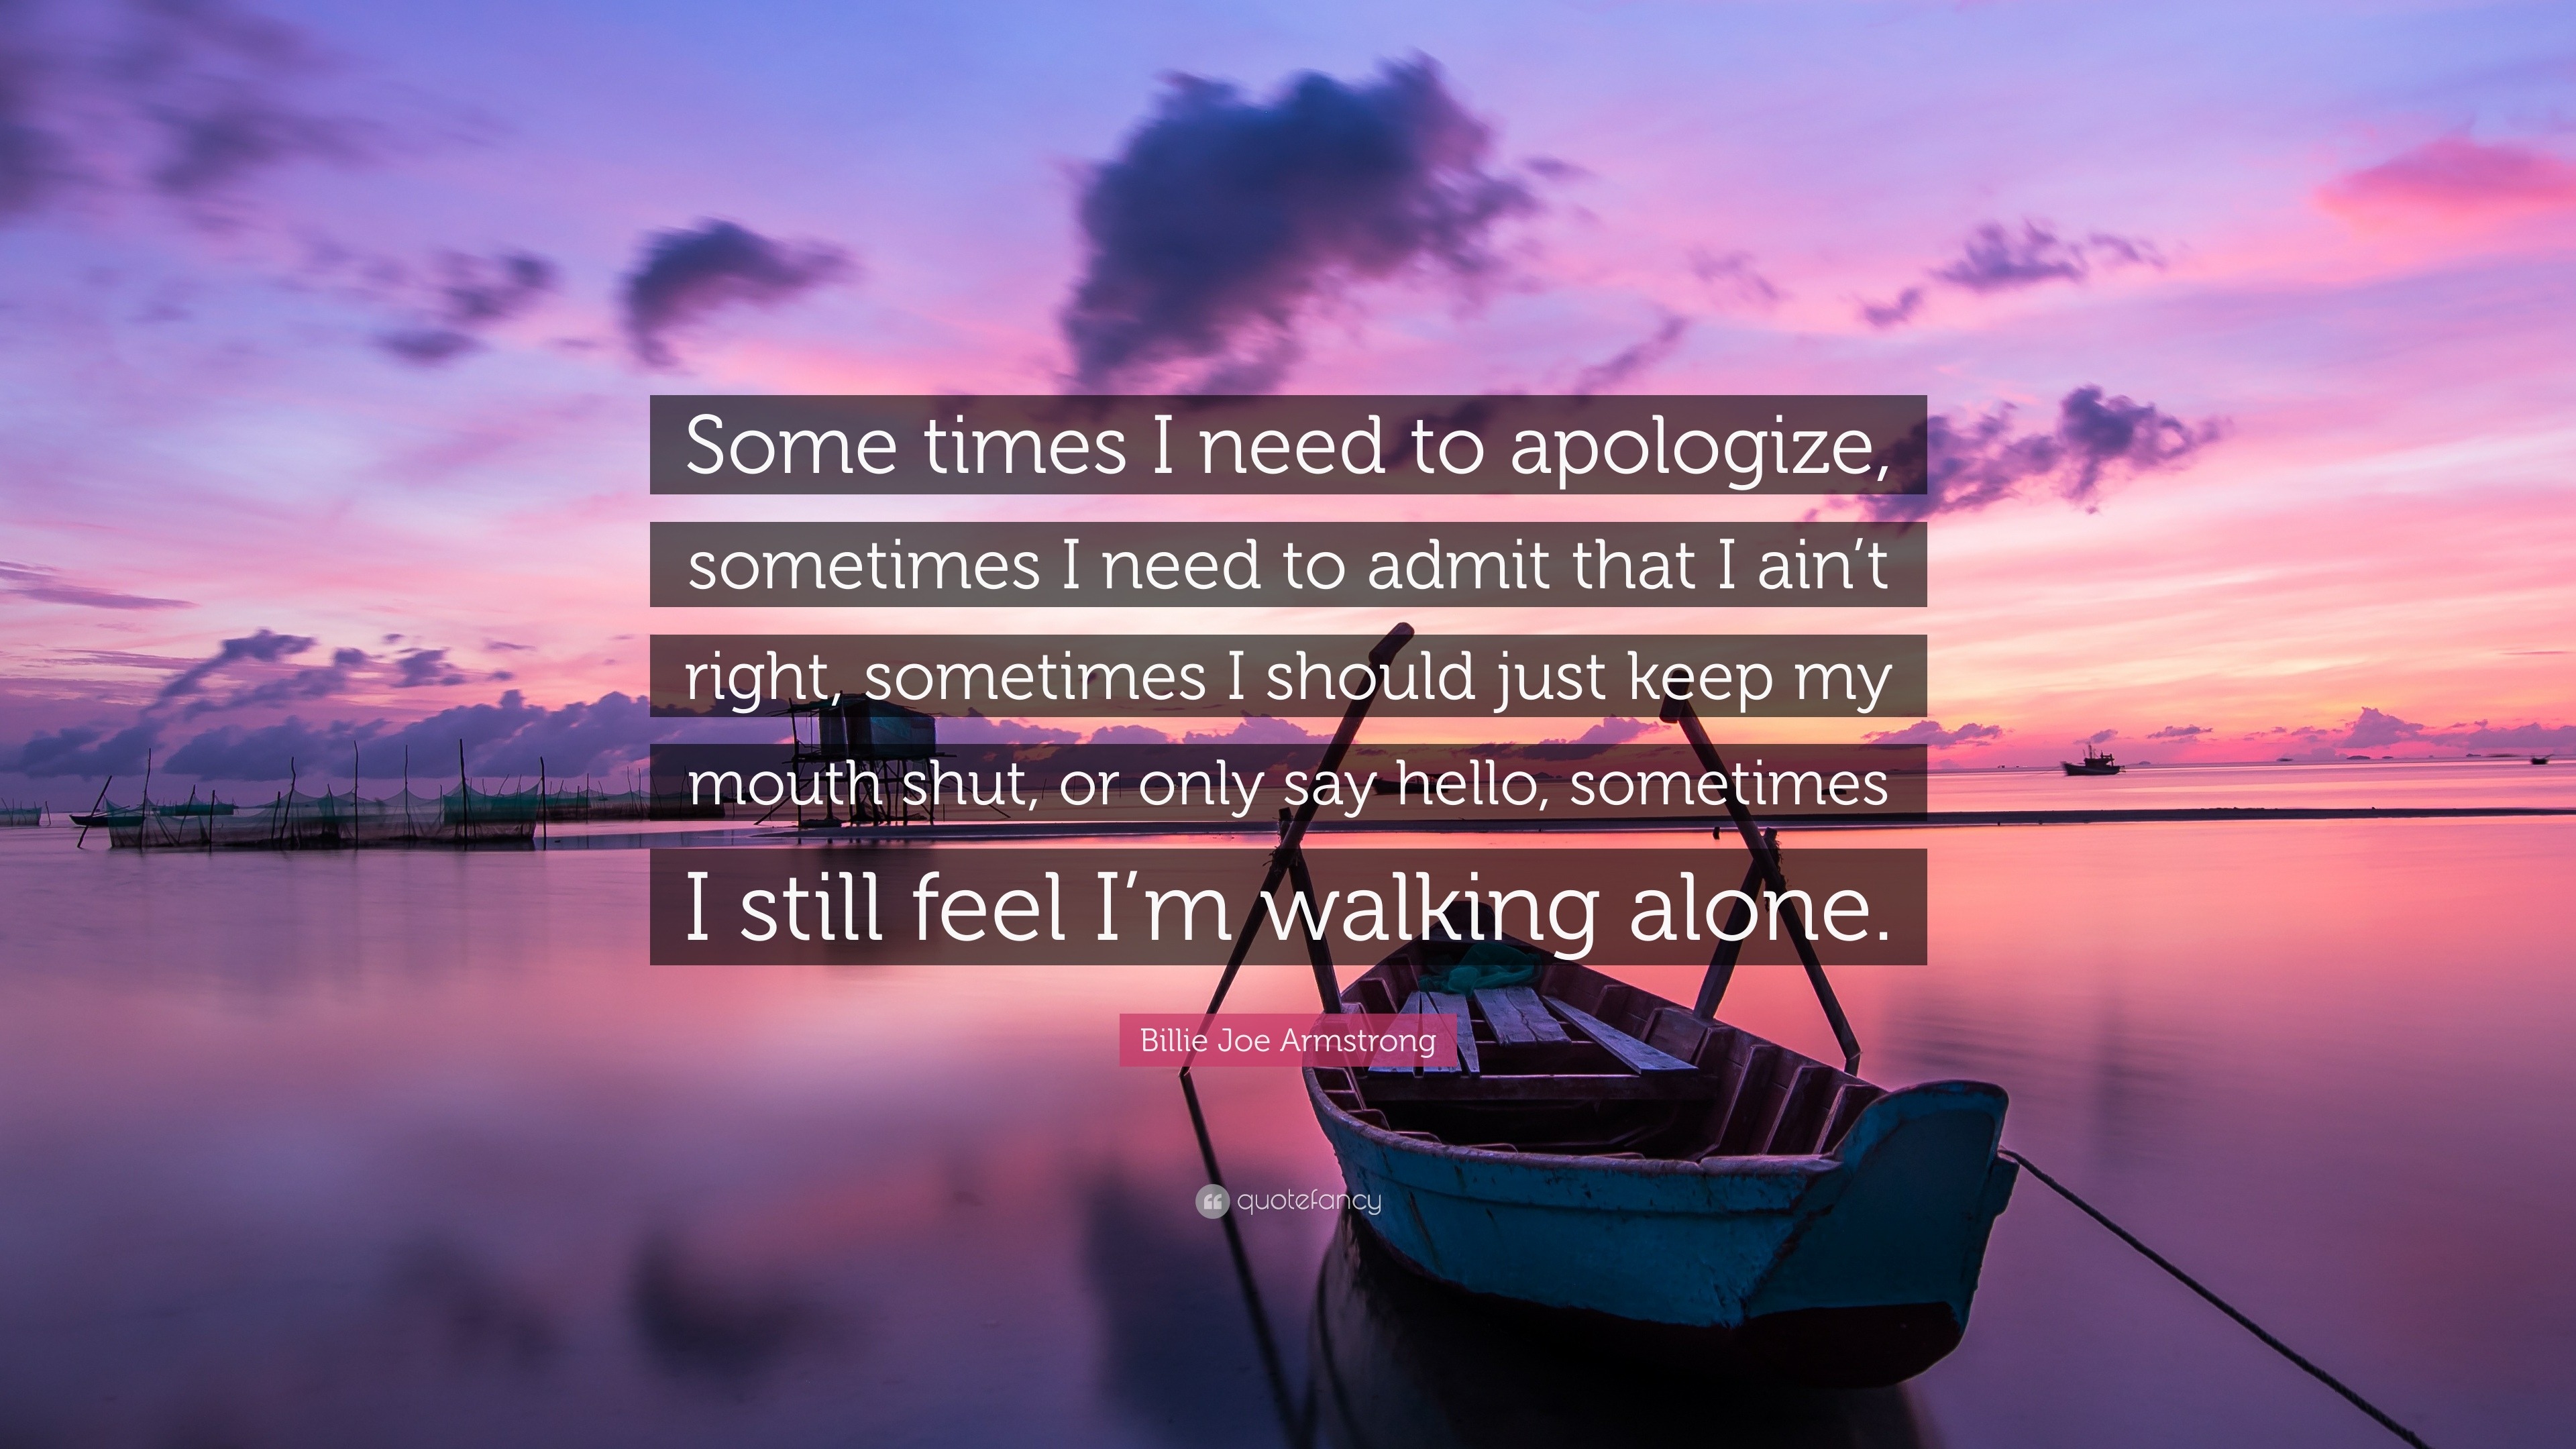 Billie Joe Armstrong Quote “some Times I Need To Apologize Sometimes I Need To Admit That I